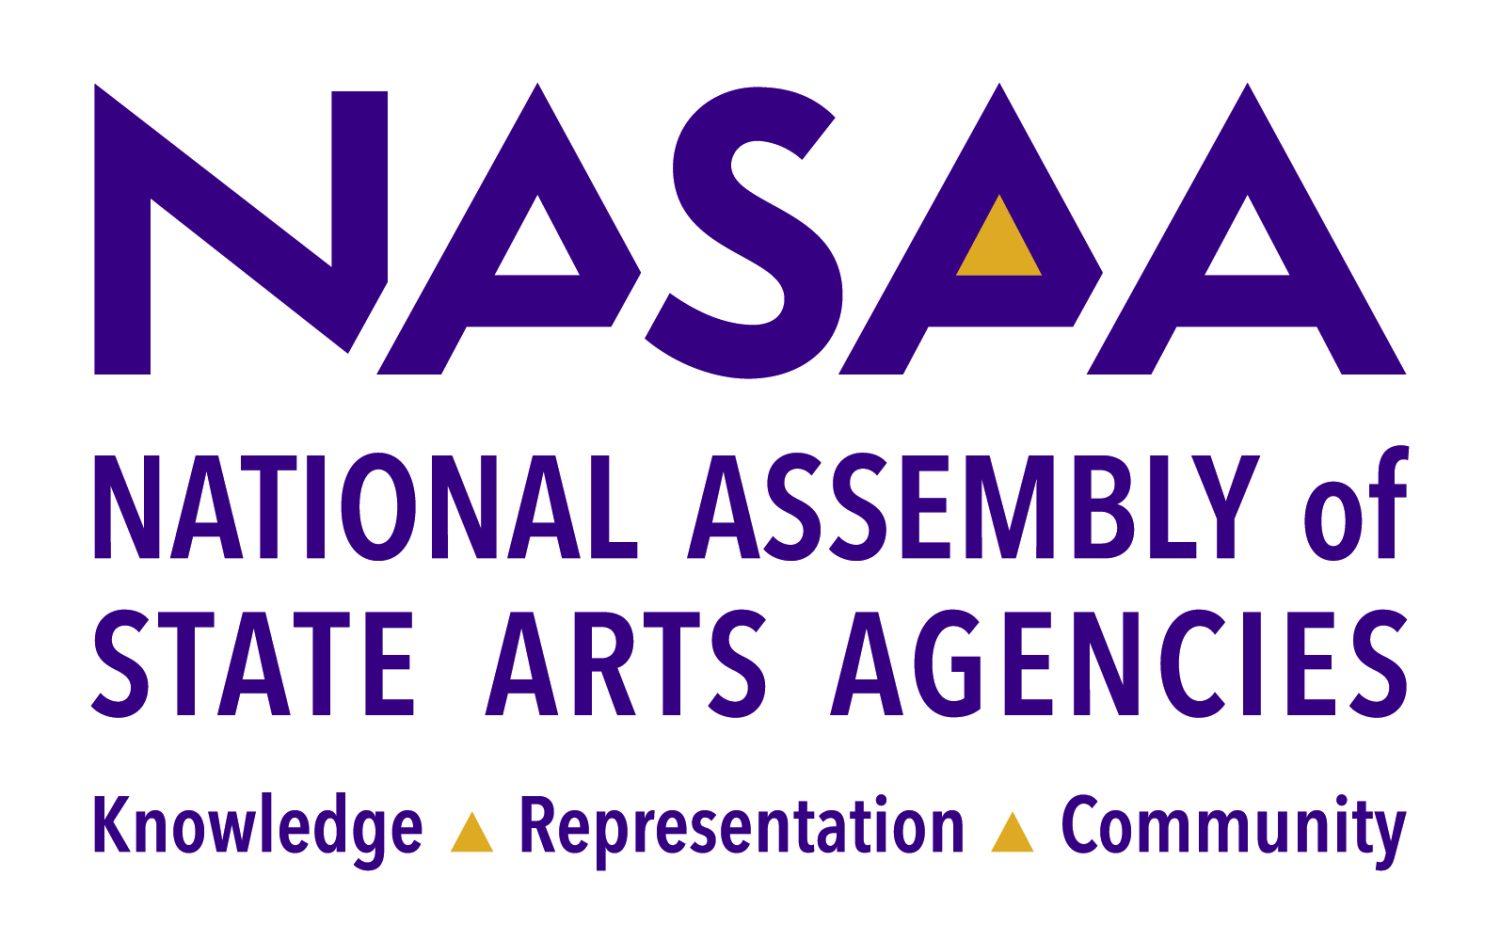 NASAA logo, which has dark blue-purple lettering with gold triangles